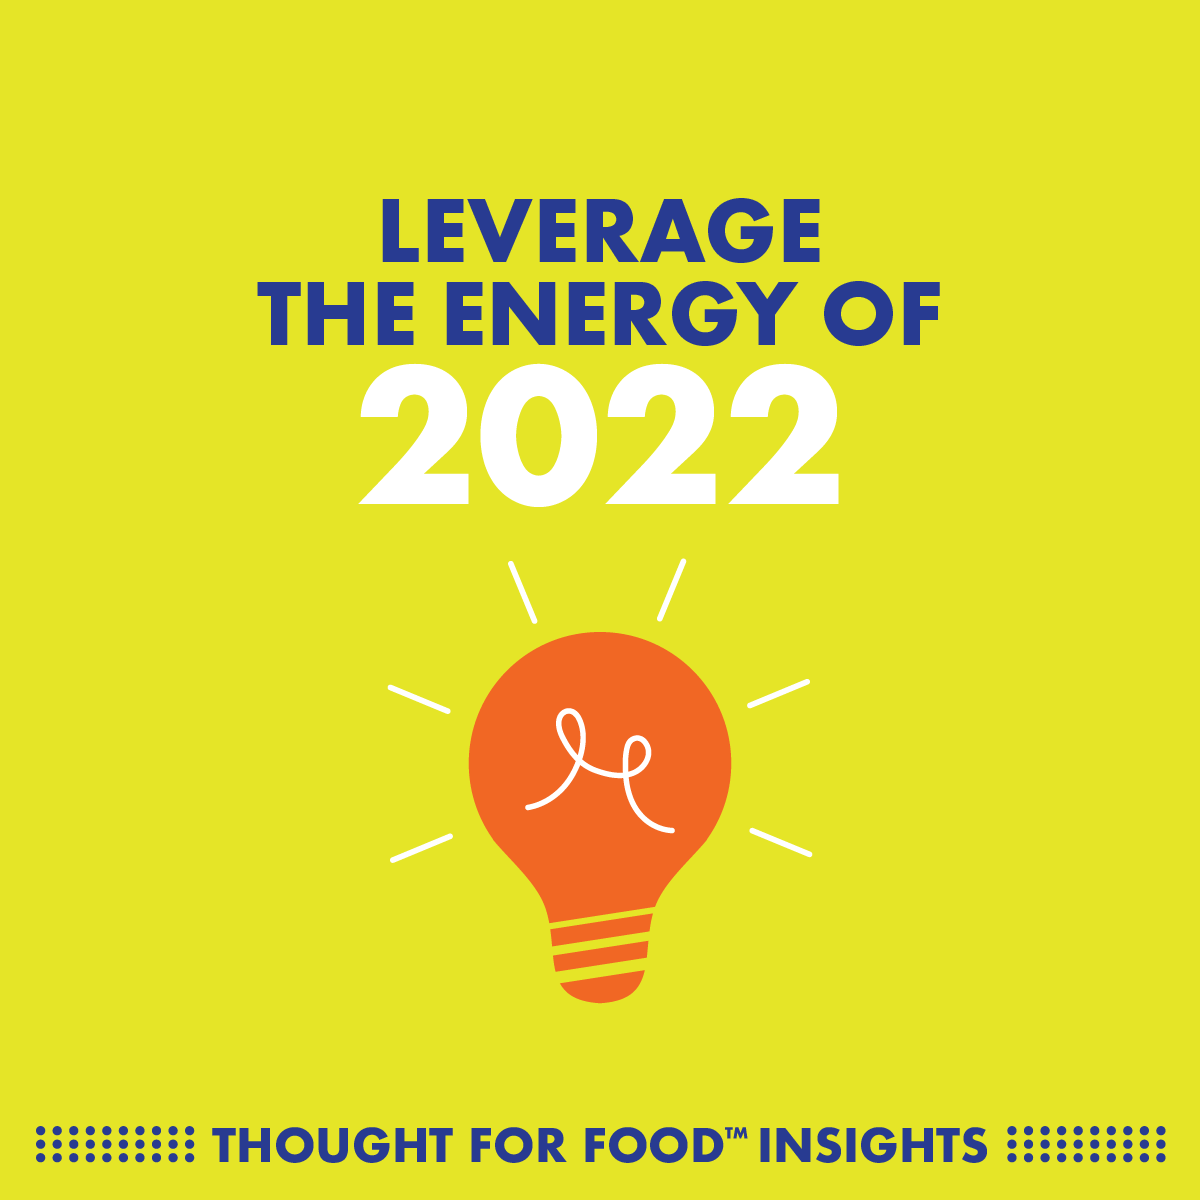 leverage the energy of 2022